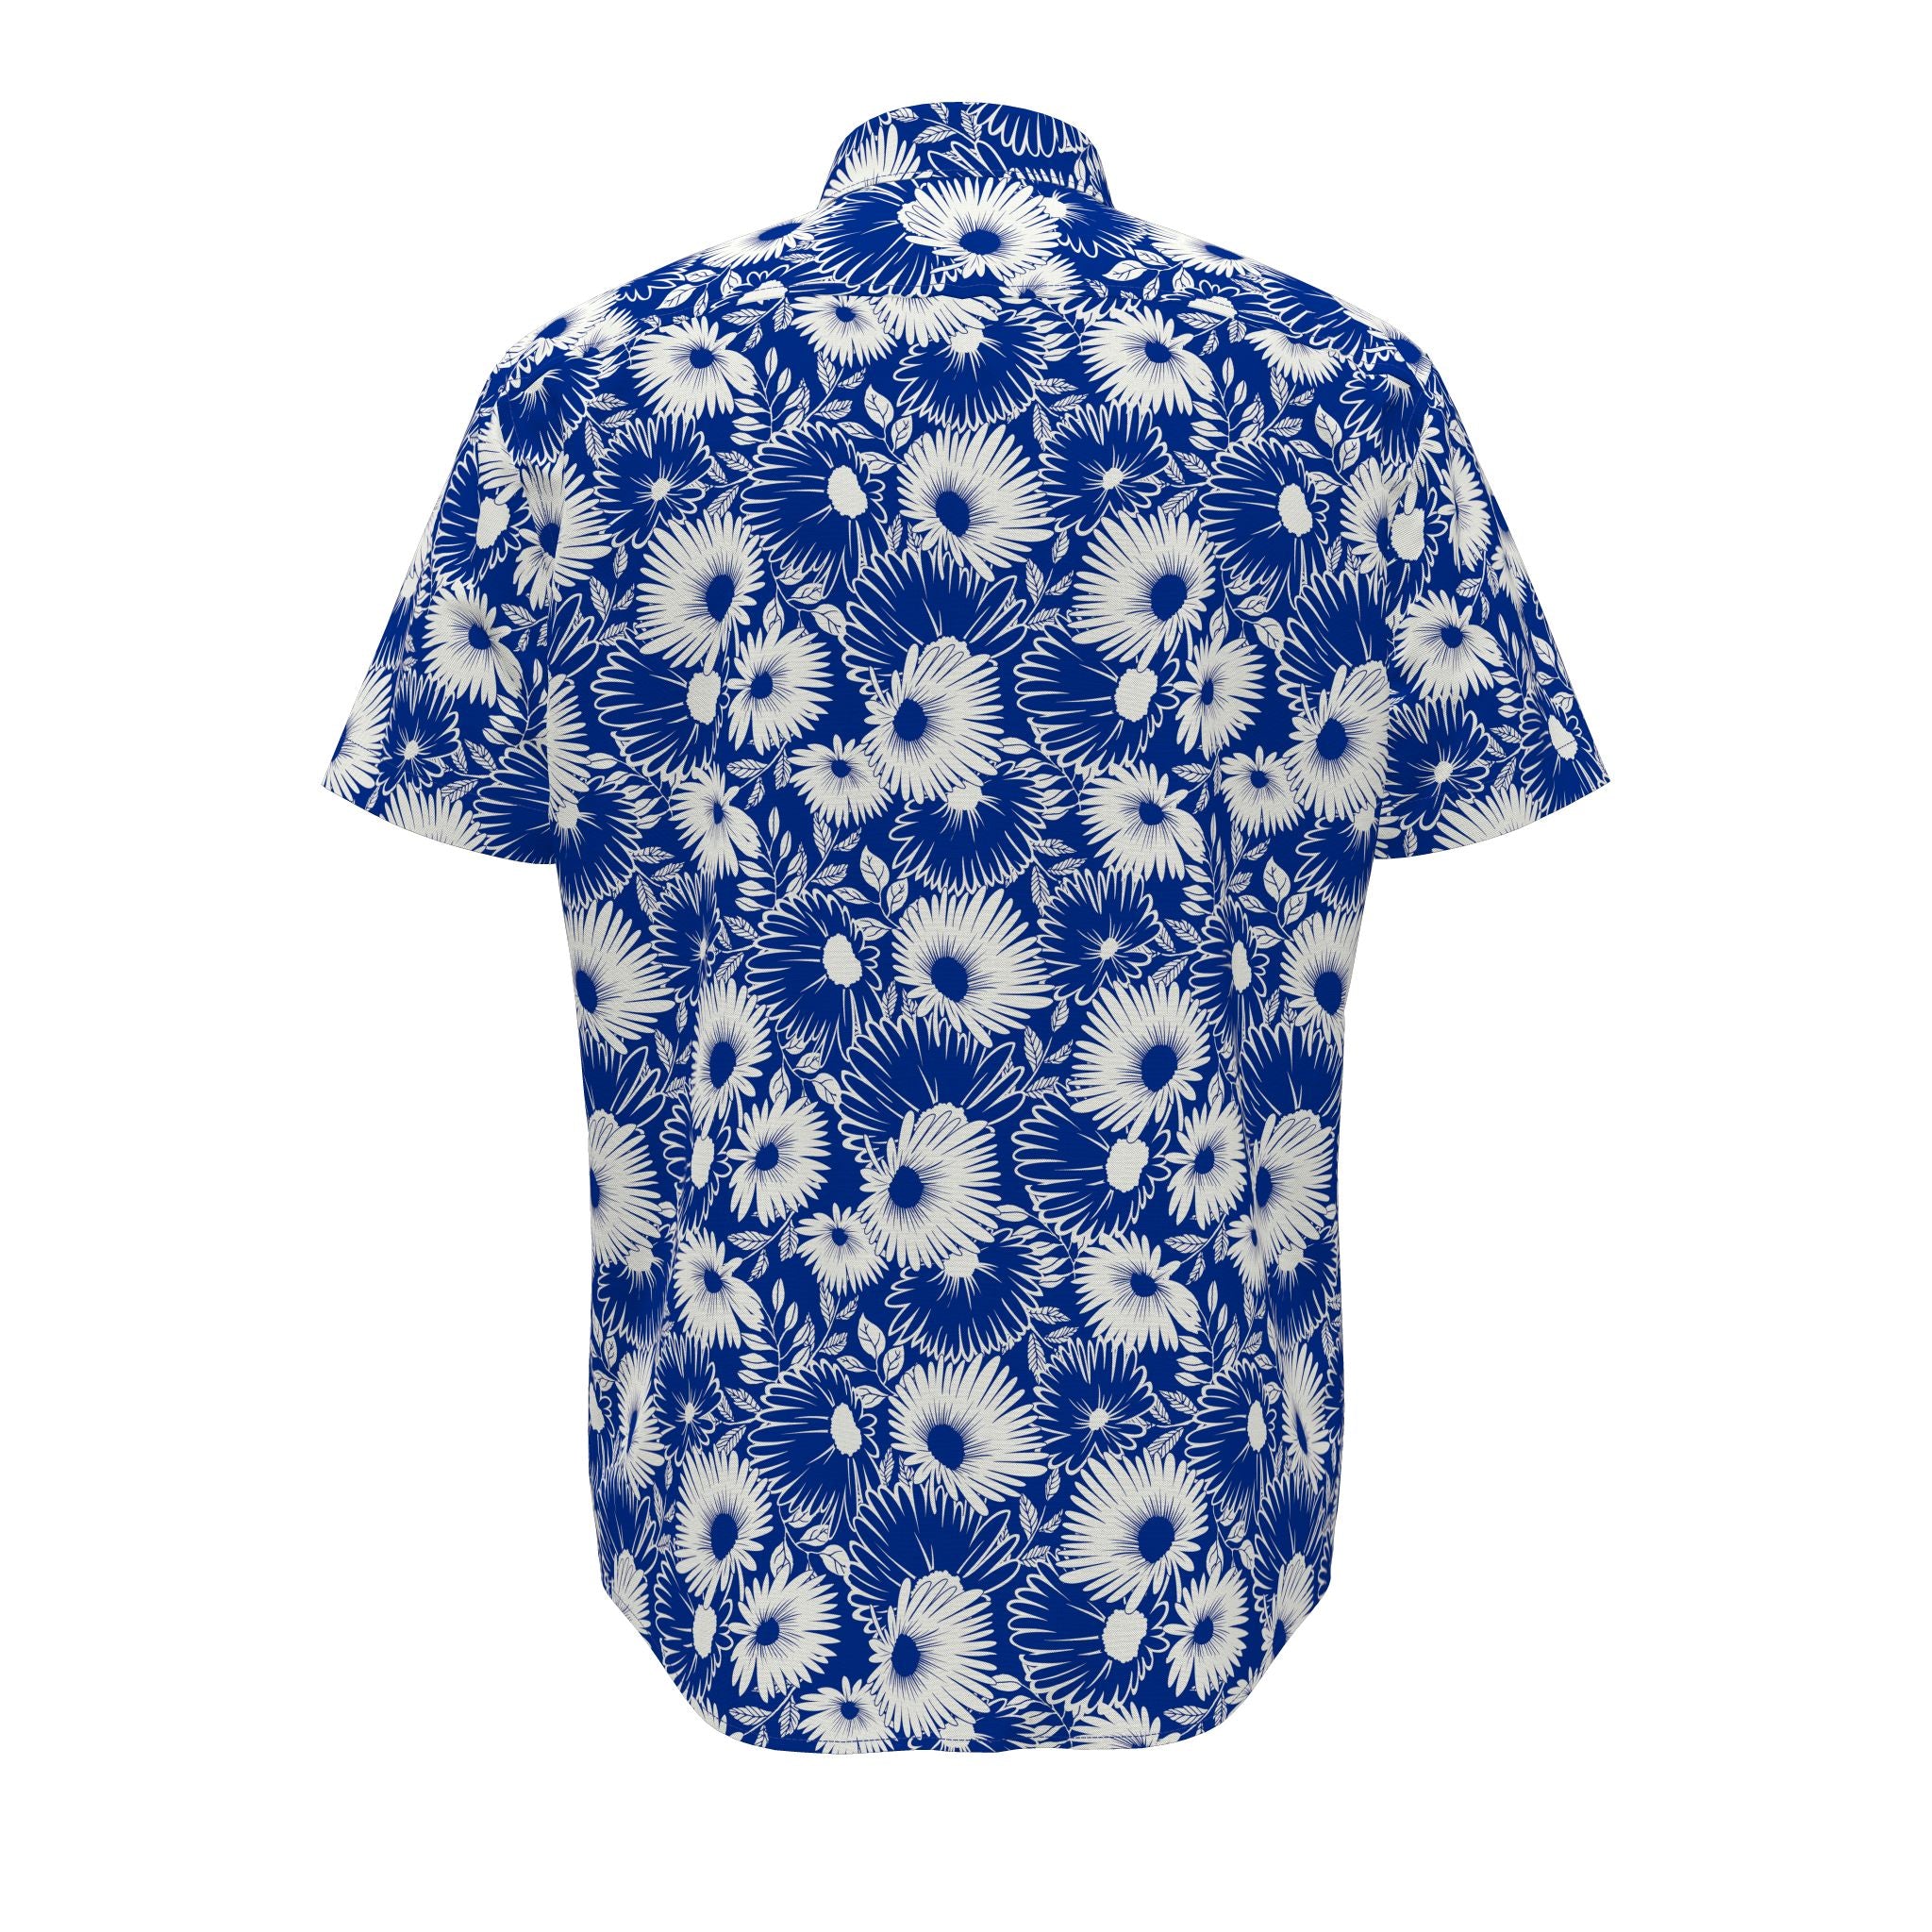 Penguin - Short Sleeve Button Up in Blue/White Floral